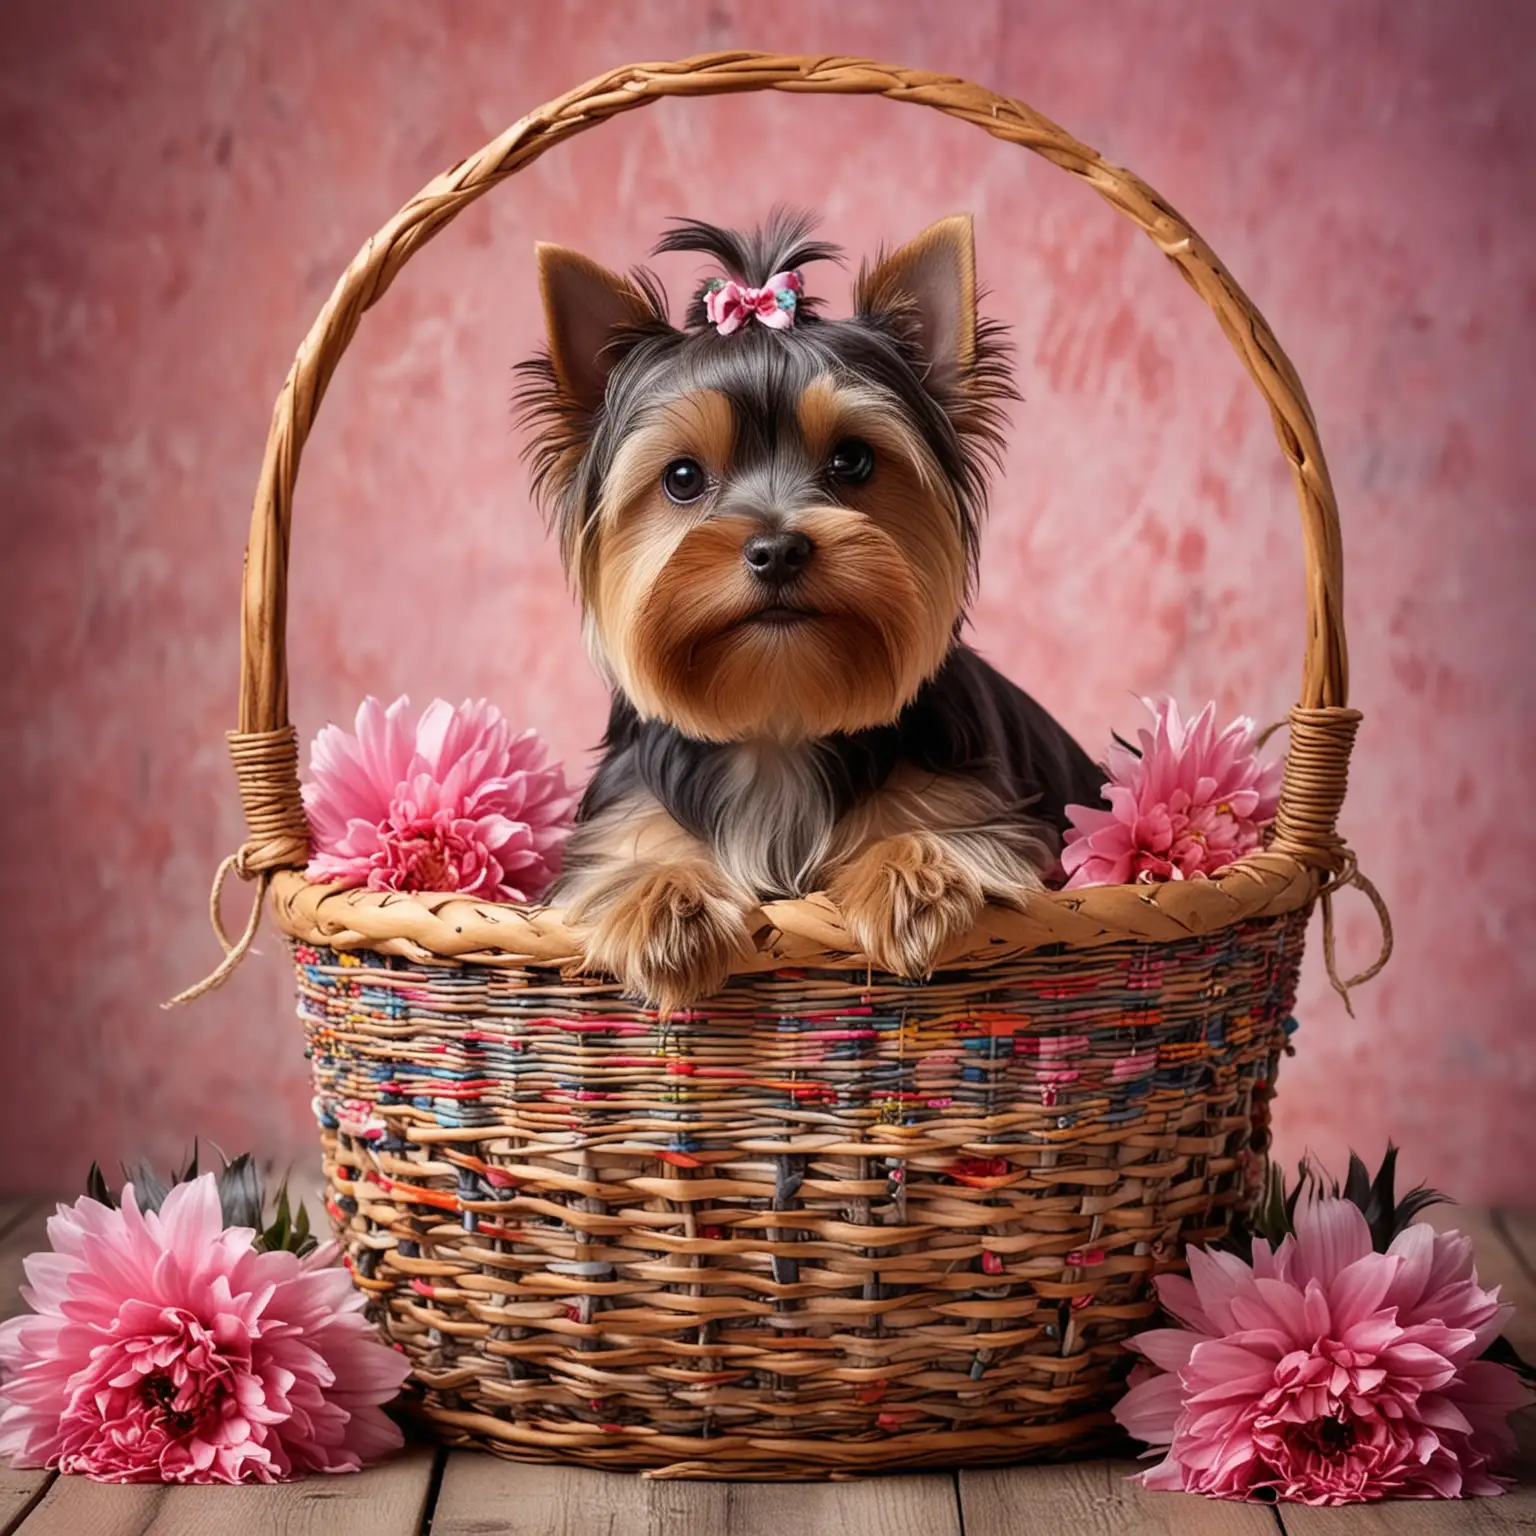 image of a beautifully groomed Yorkshire Terrier sitting in a beautiful decorated basket, have a beautiful natural colorful background, have only one dog in the basket